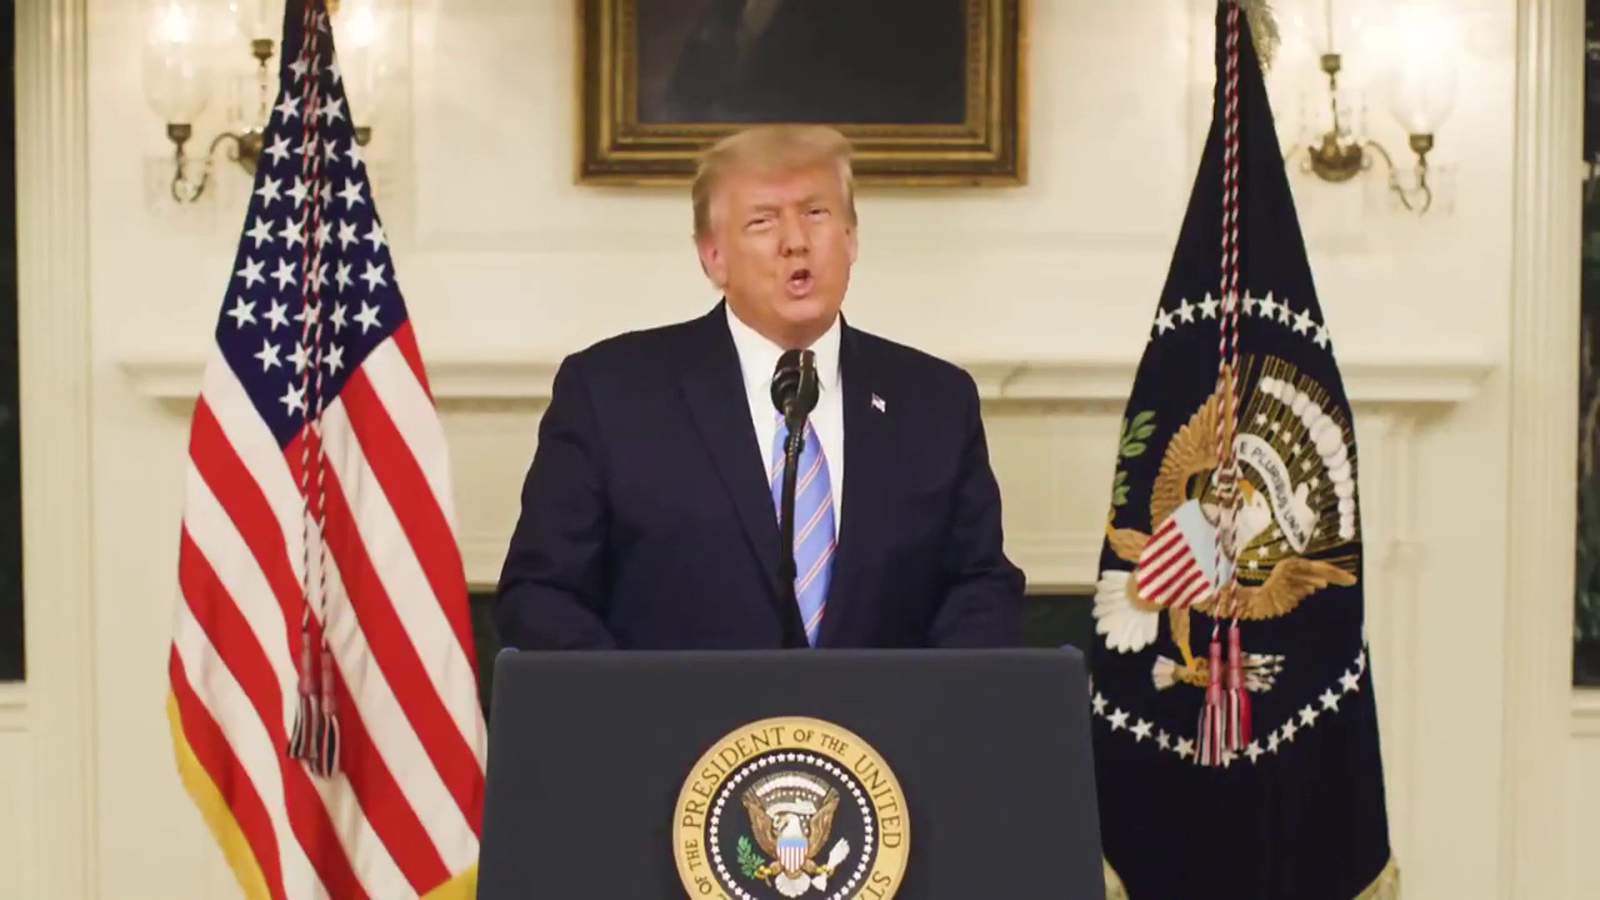 President Trump calls for ‘healing and reconciliation’ in new video, concedes to Biden